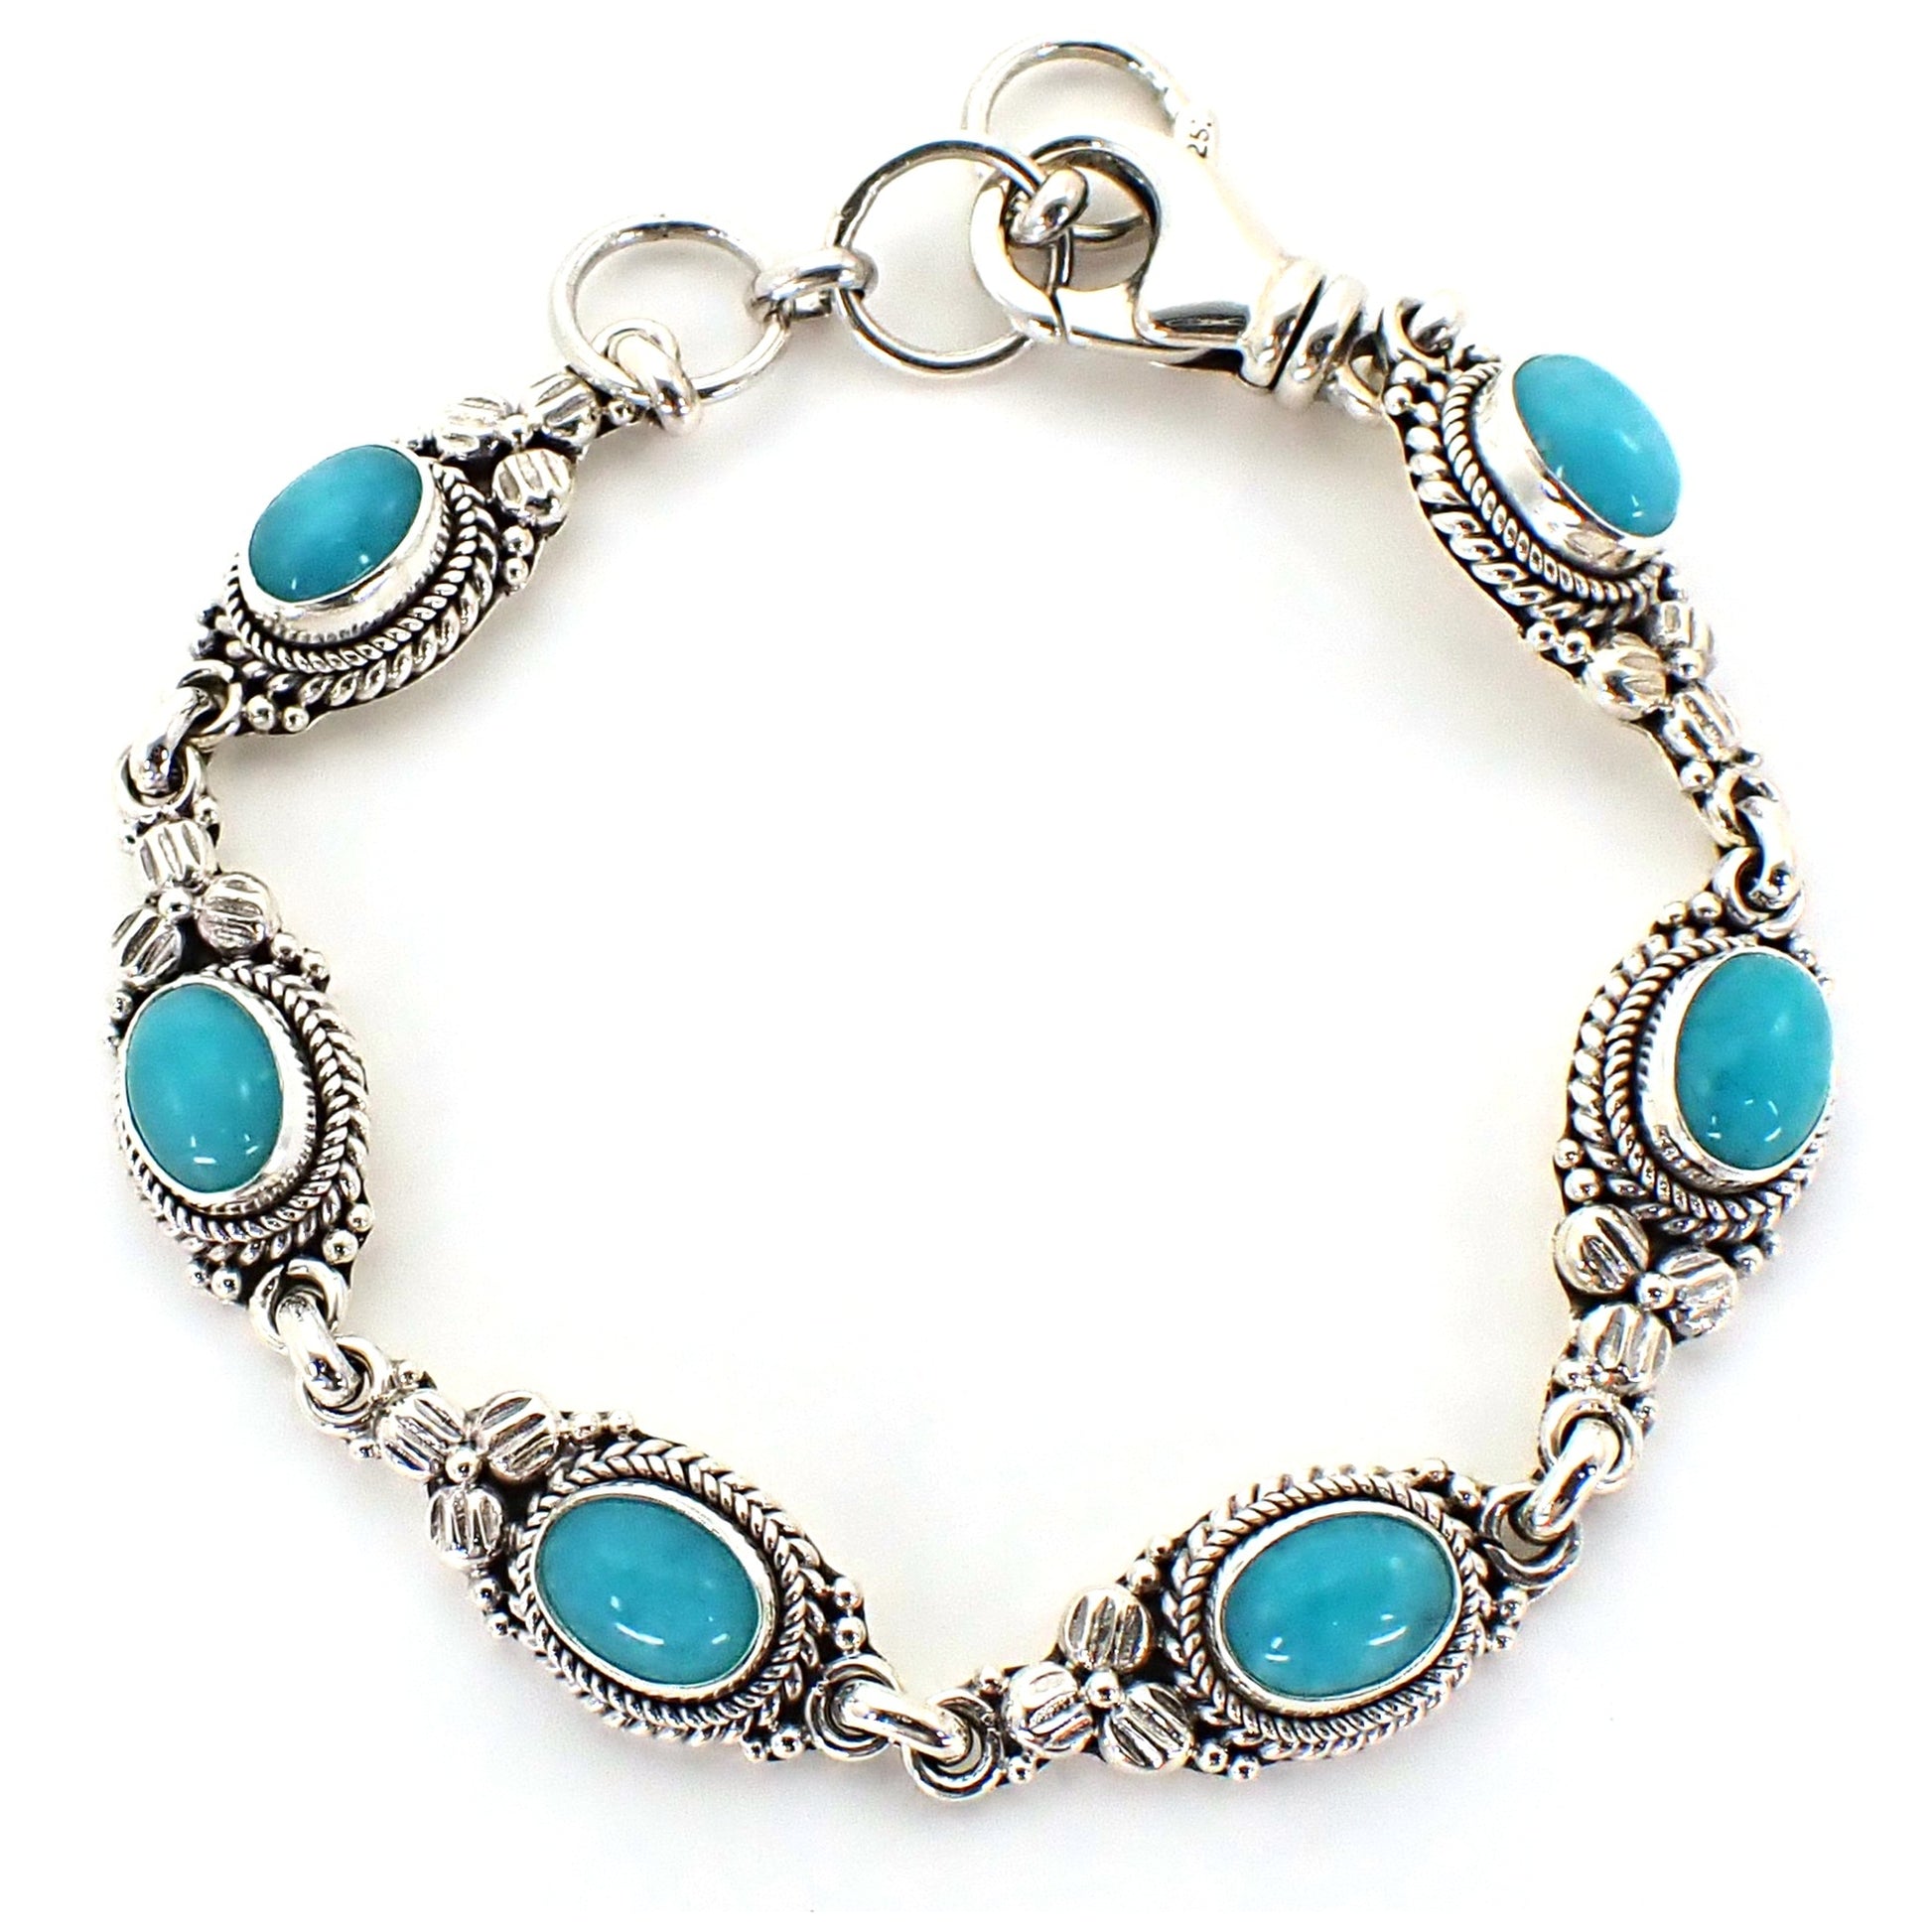 Silver bracelet with six links holding blue cabochon amazonite stones and floral accents.